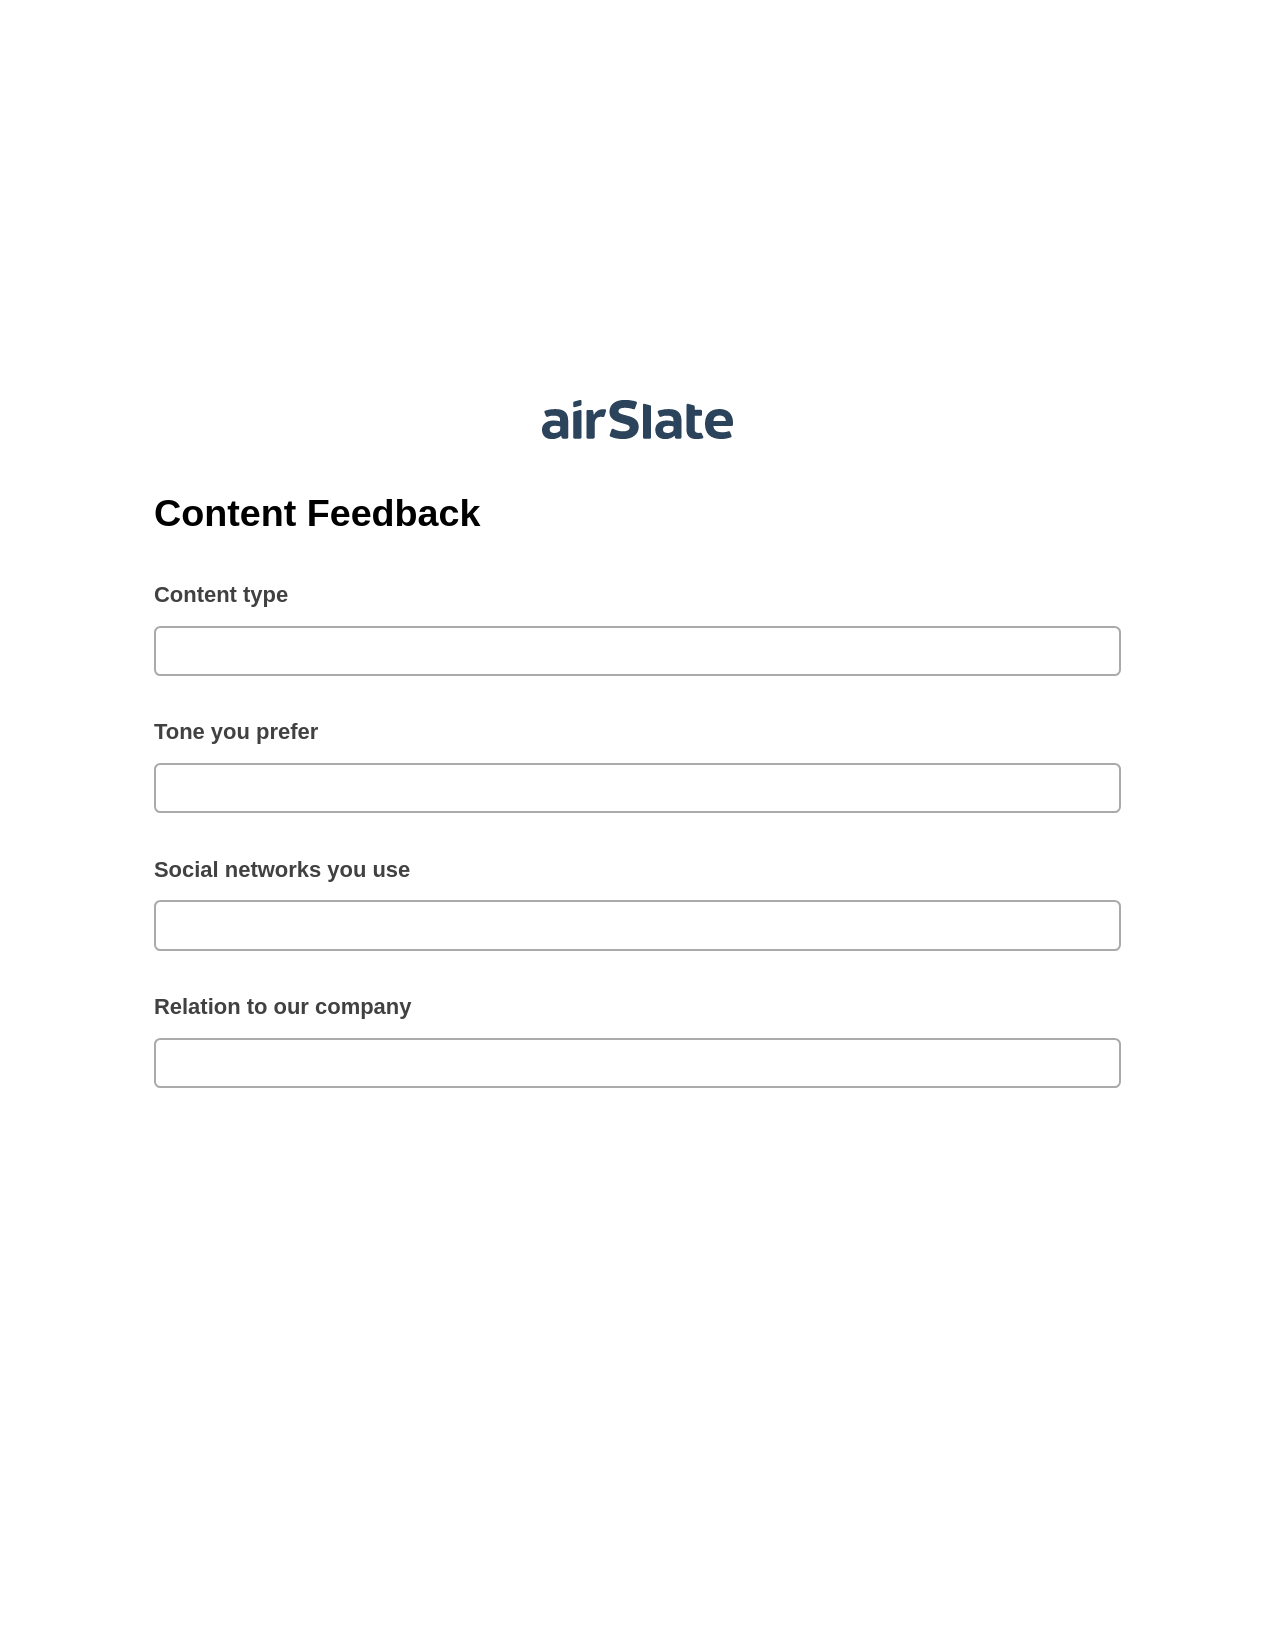 Multirole Content Feedback Pre-fill from CSV File Bot, Jira Bot, Export to Smartsheet